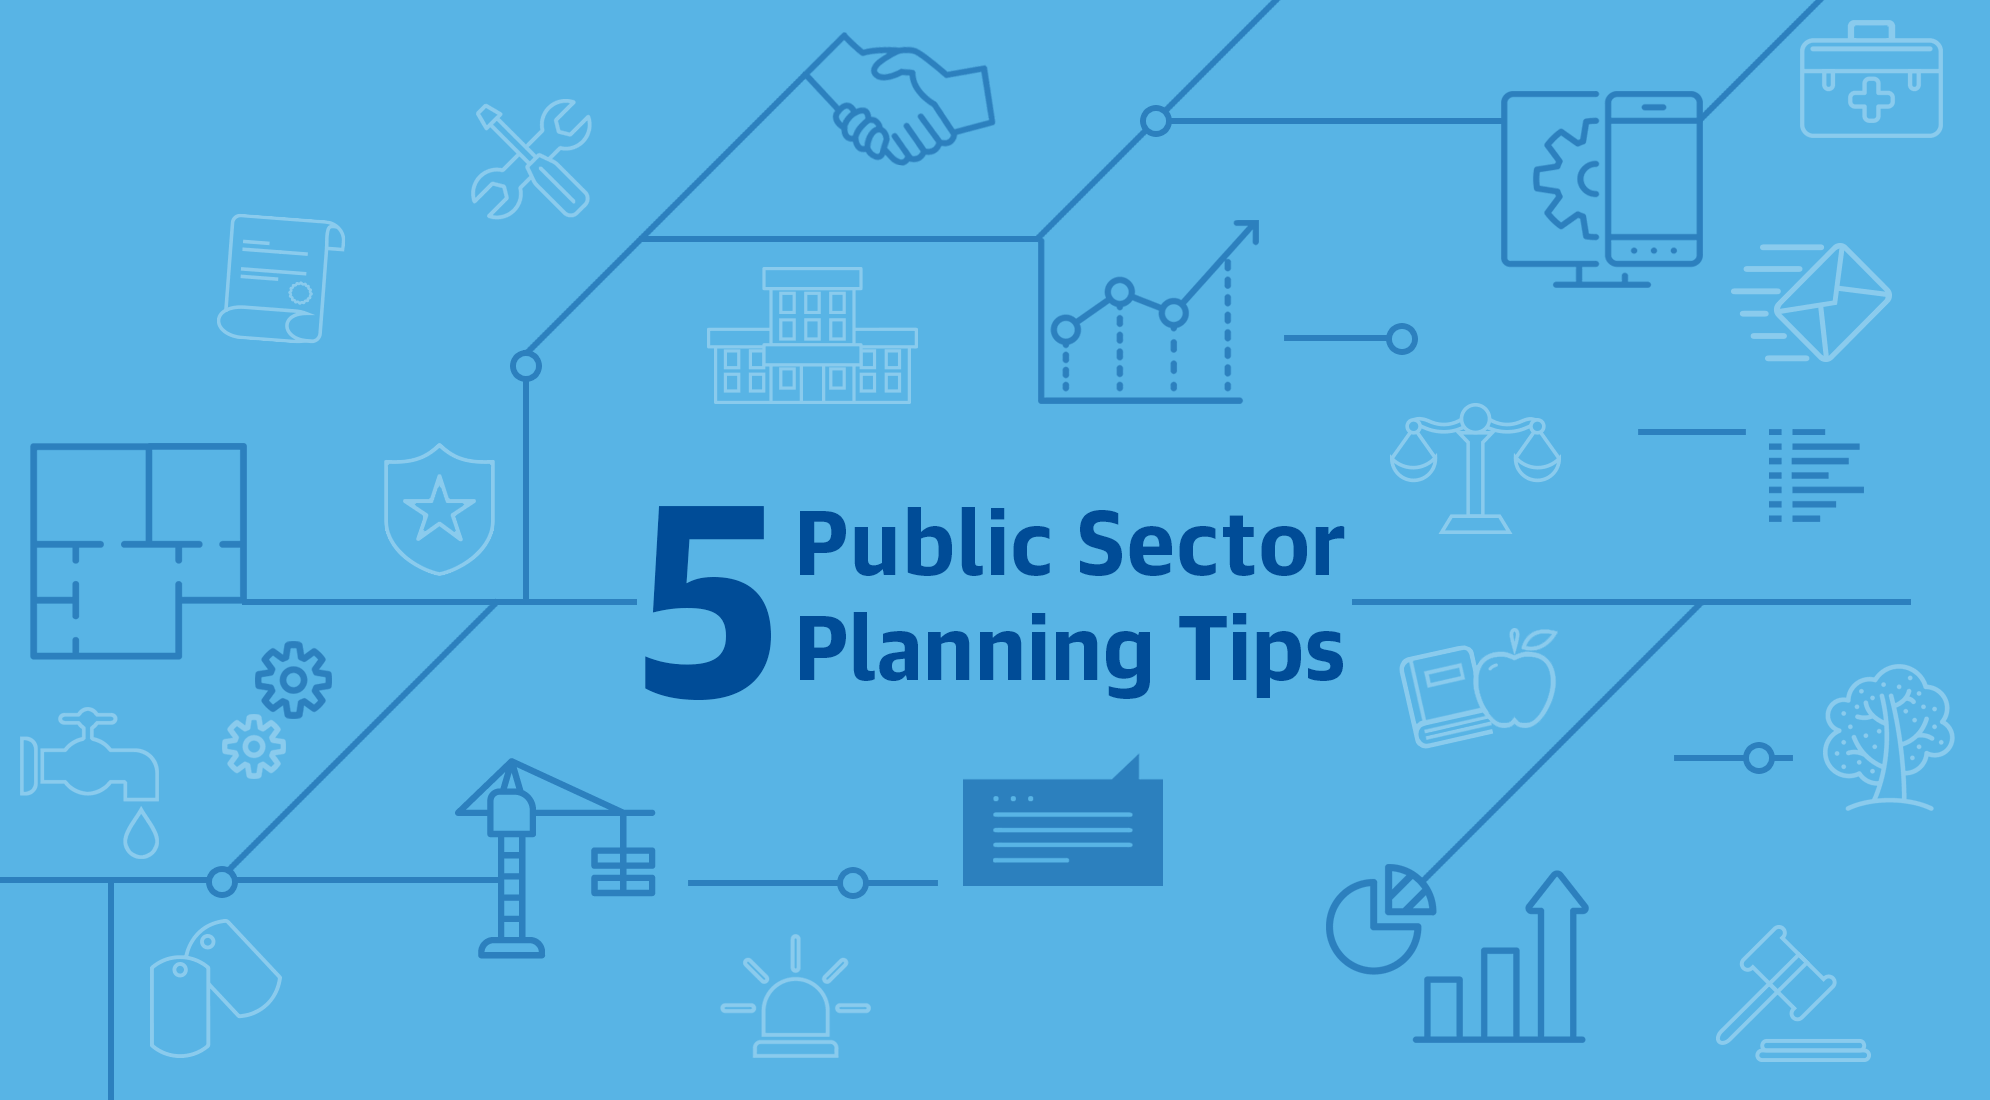 5 Construction Project Planning Tips for the Public Sector